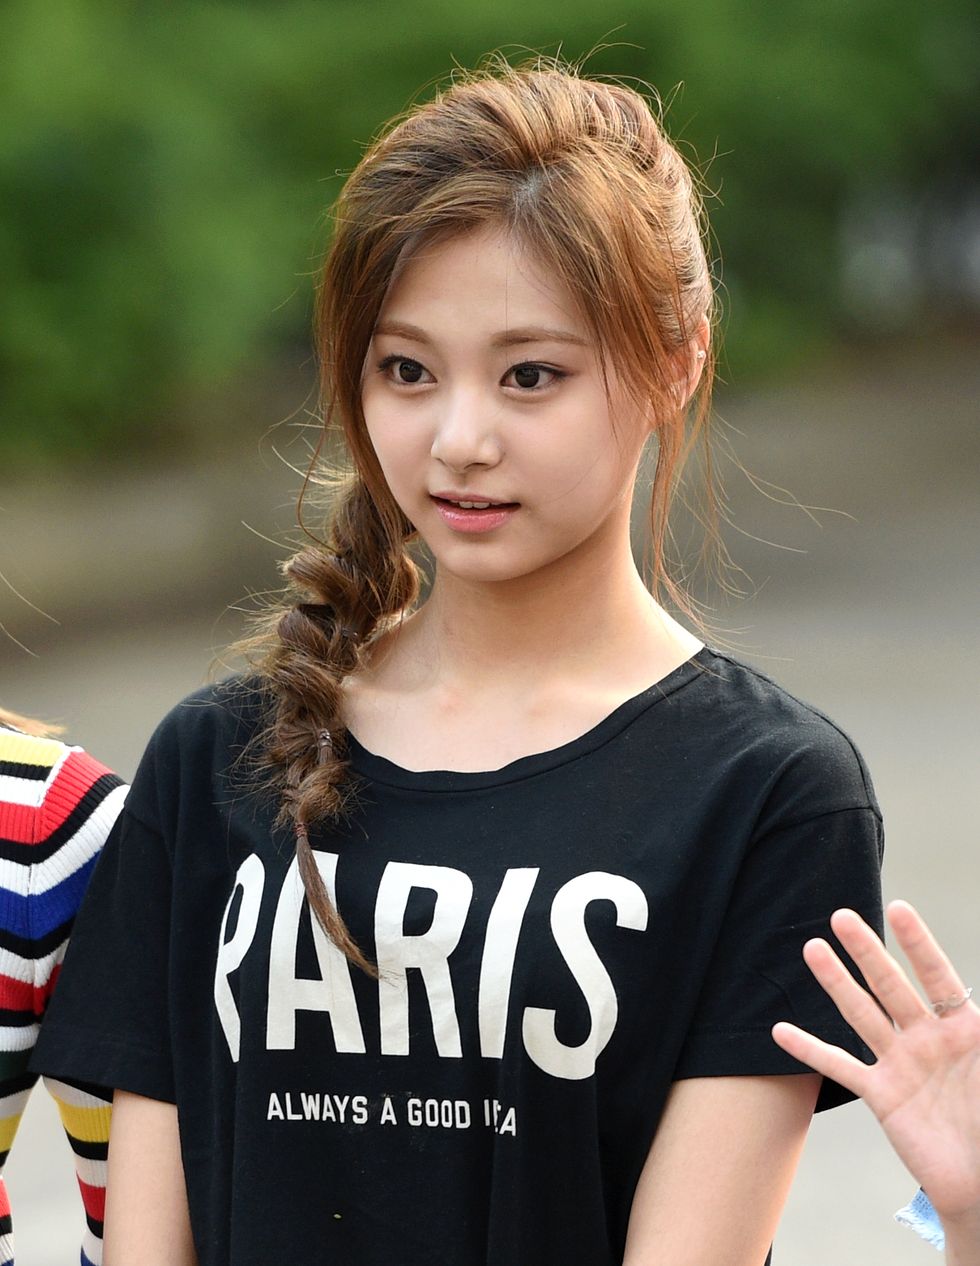 tzuyu of twice attends the rehearsal of kbs music bank at yeouido kbs studio on june 10th in seoul, south korea photoosen photoosen